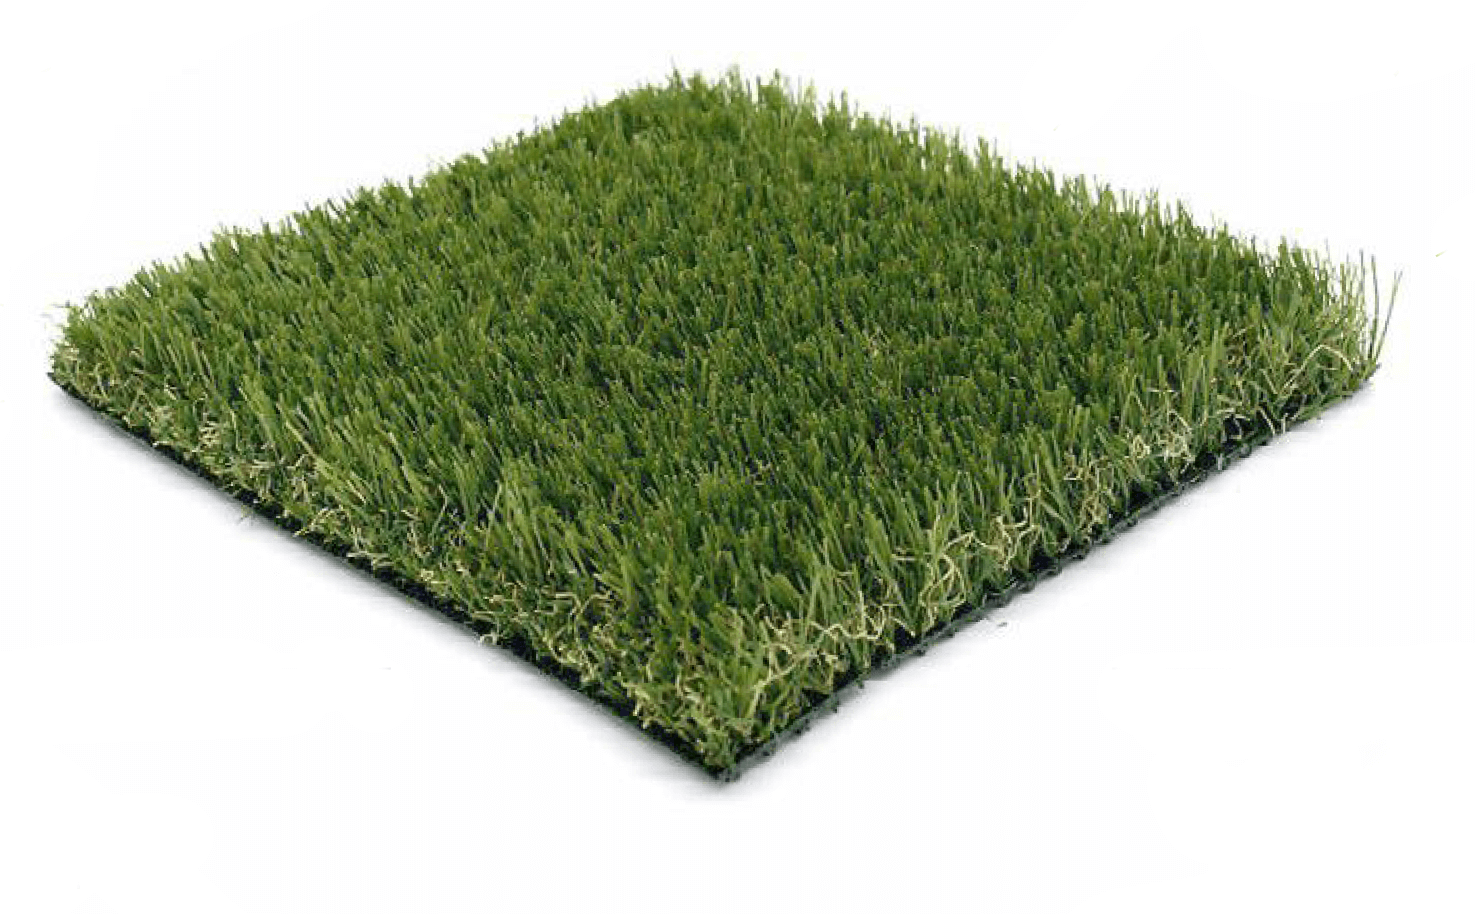 New Lawn Trend Sample